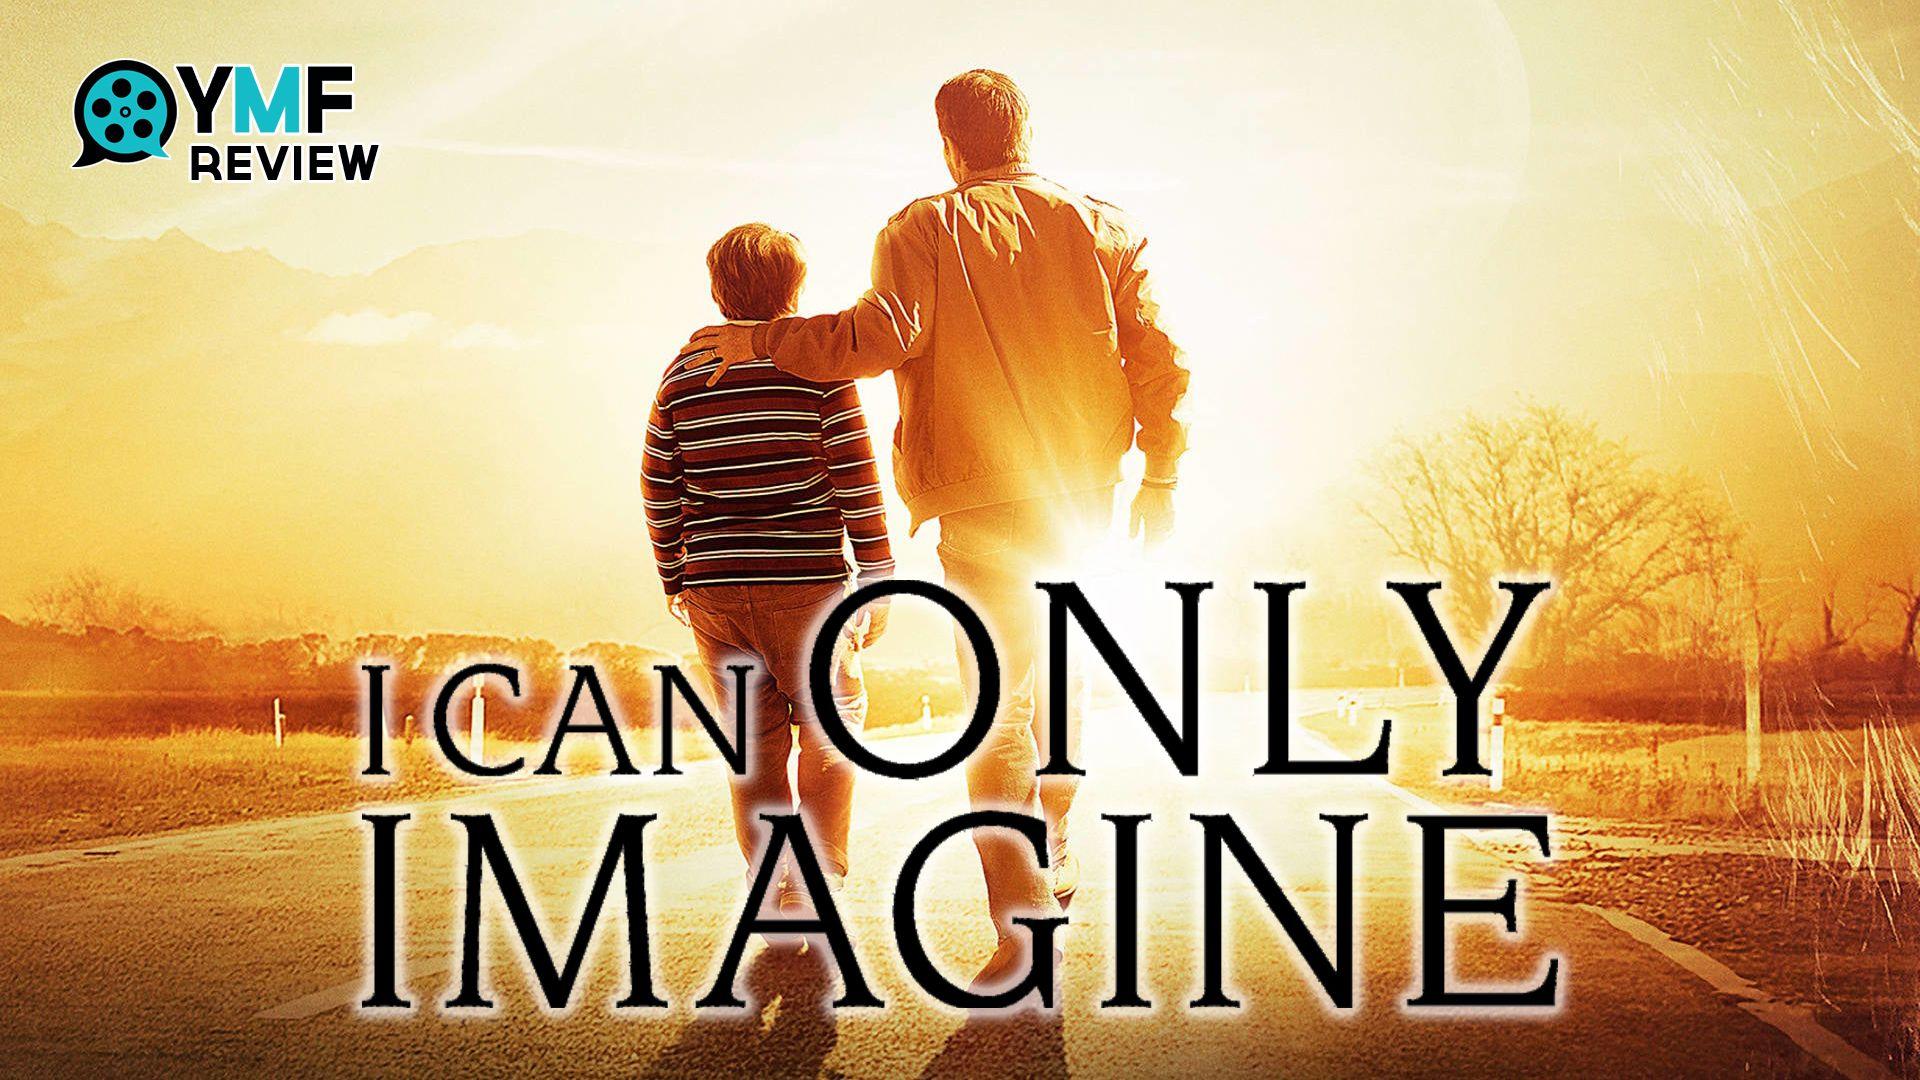 Your Movie Friend. 5 Things About “I Can Only Imagine” (Movie Review)